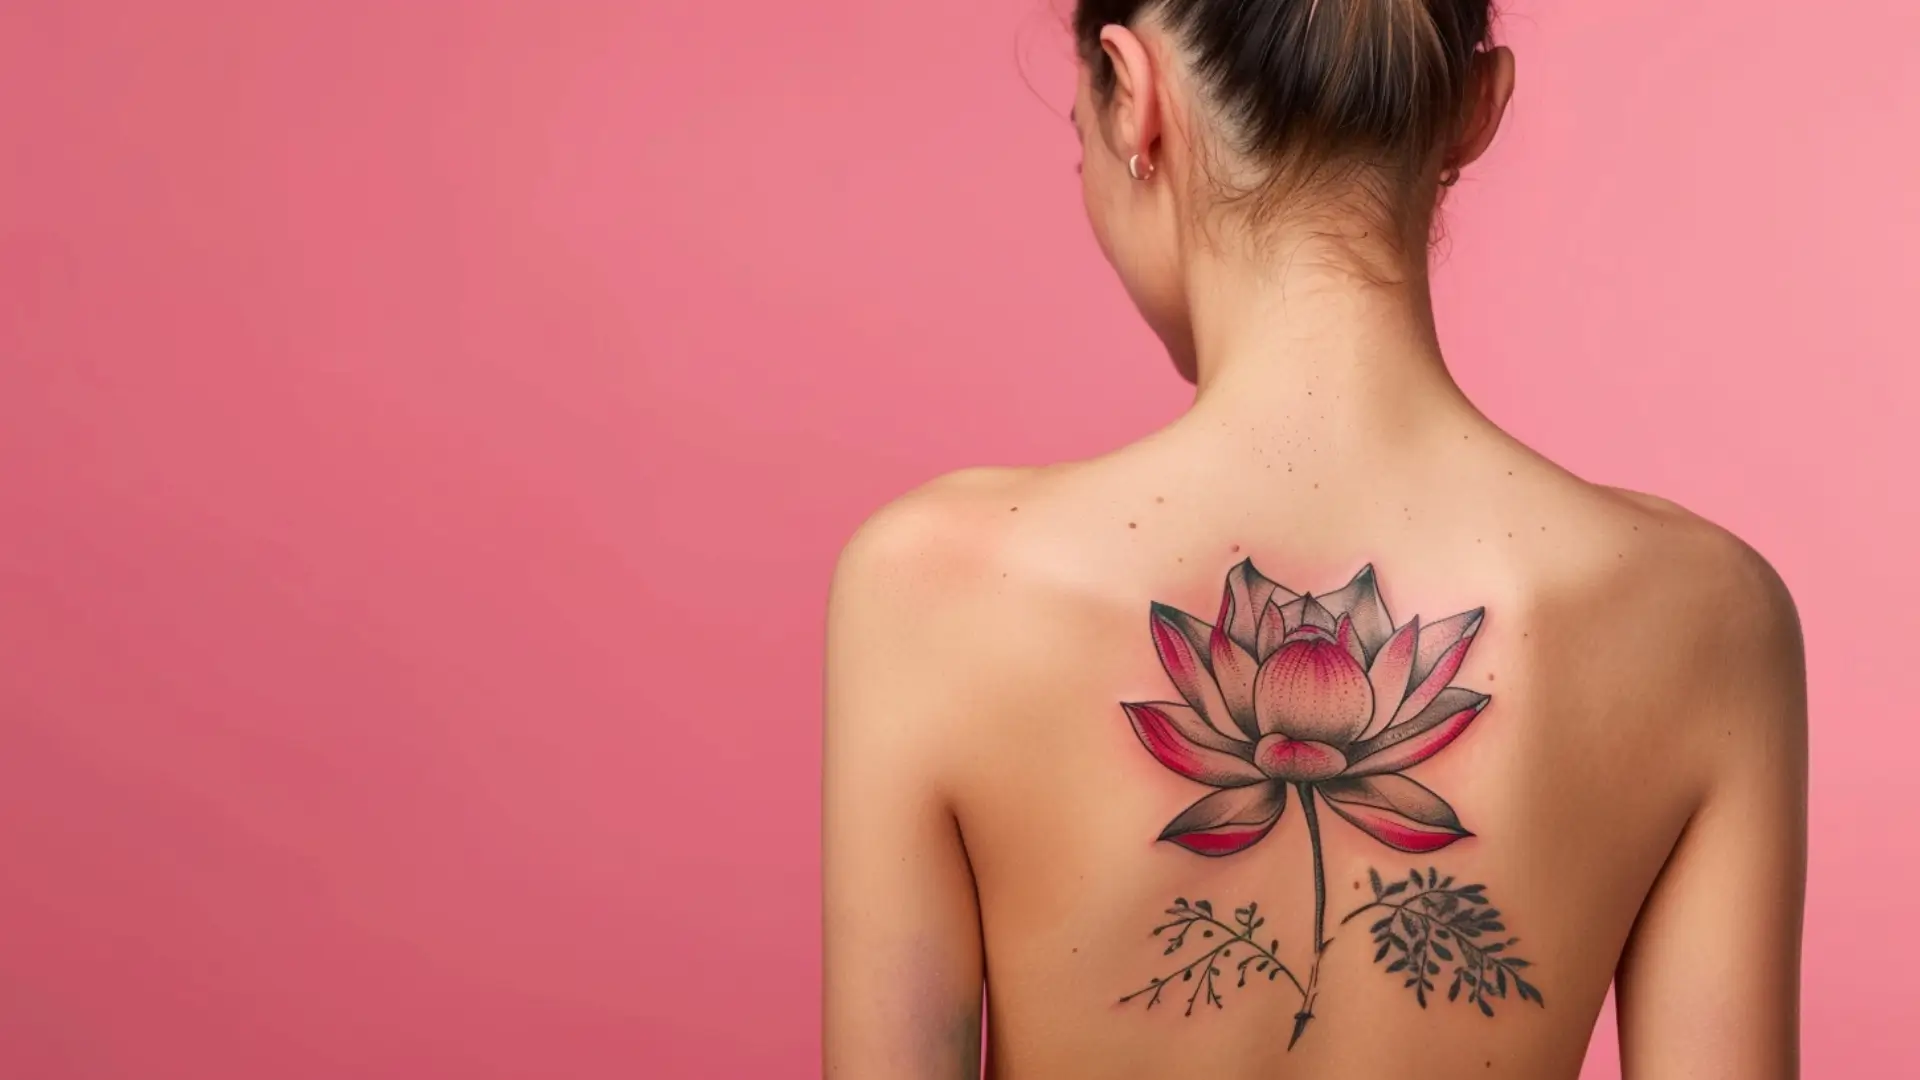 Beautiful lotus tattoo designs for our beautiful female clients Lotus tattoo  is a symbol of purity, enlightenment, and spiritual growt... | Instagram